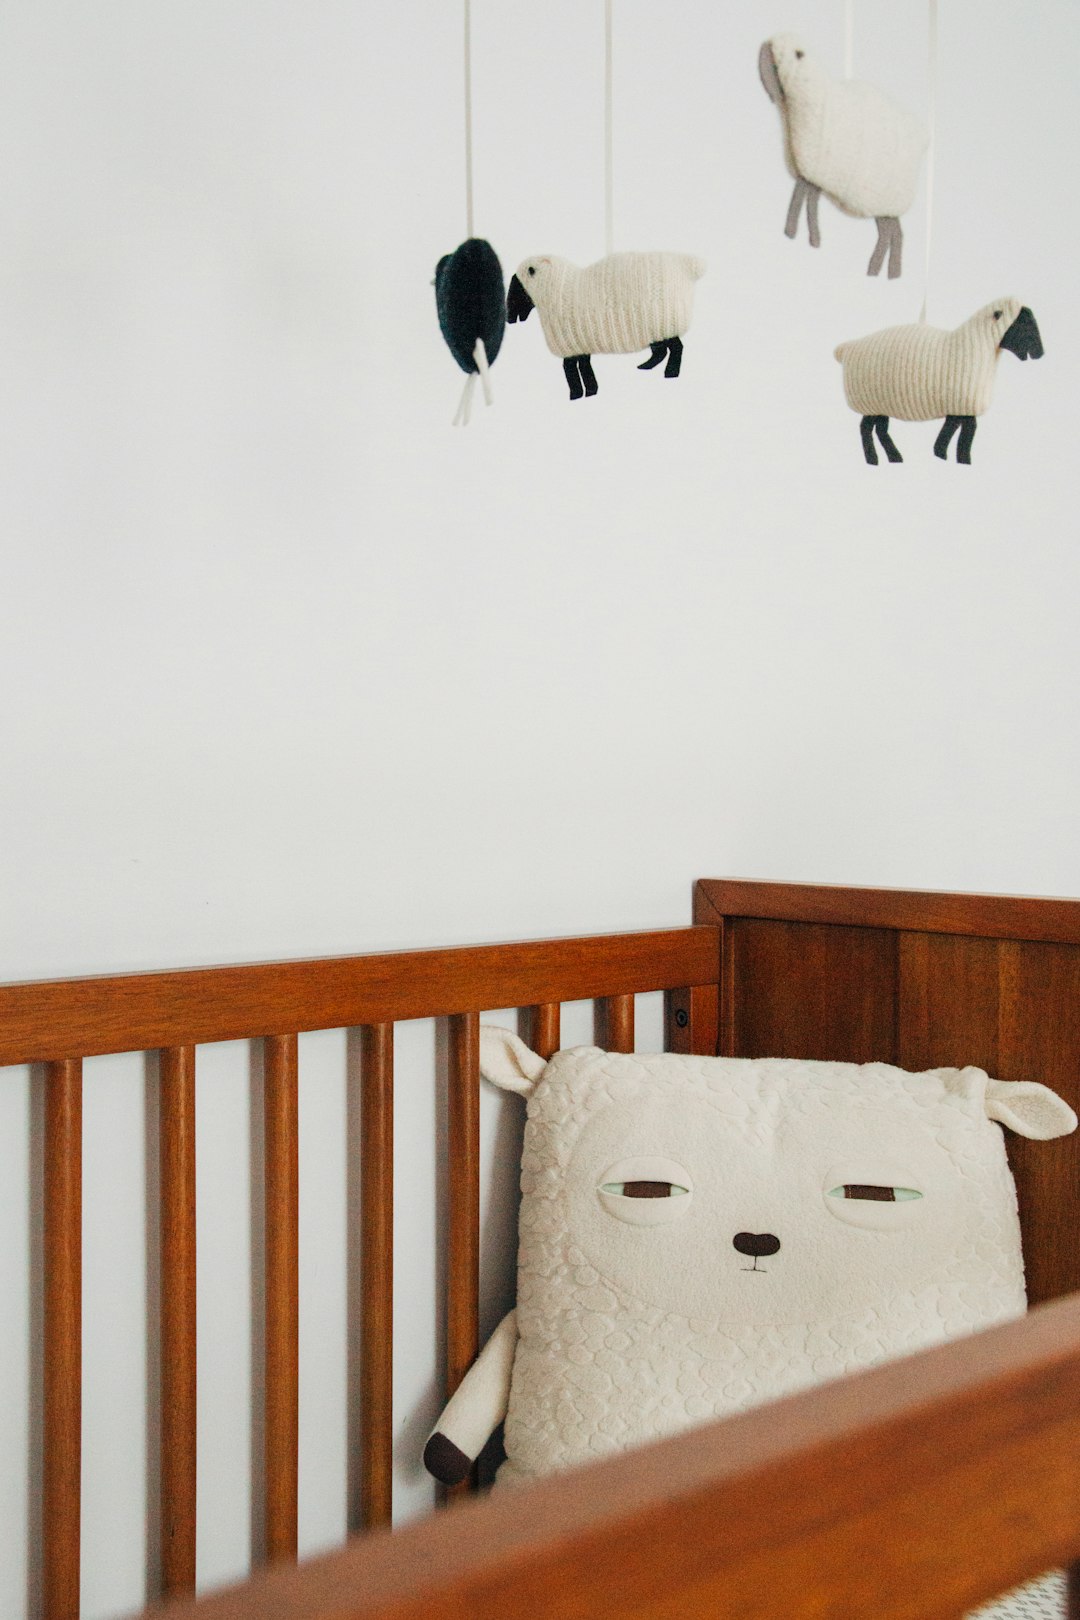  crib with sheep pillow and crib mobile bedstead bunk cot